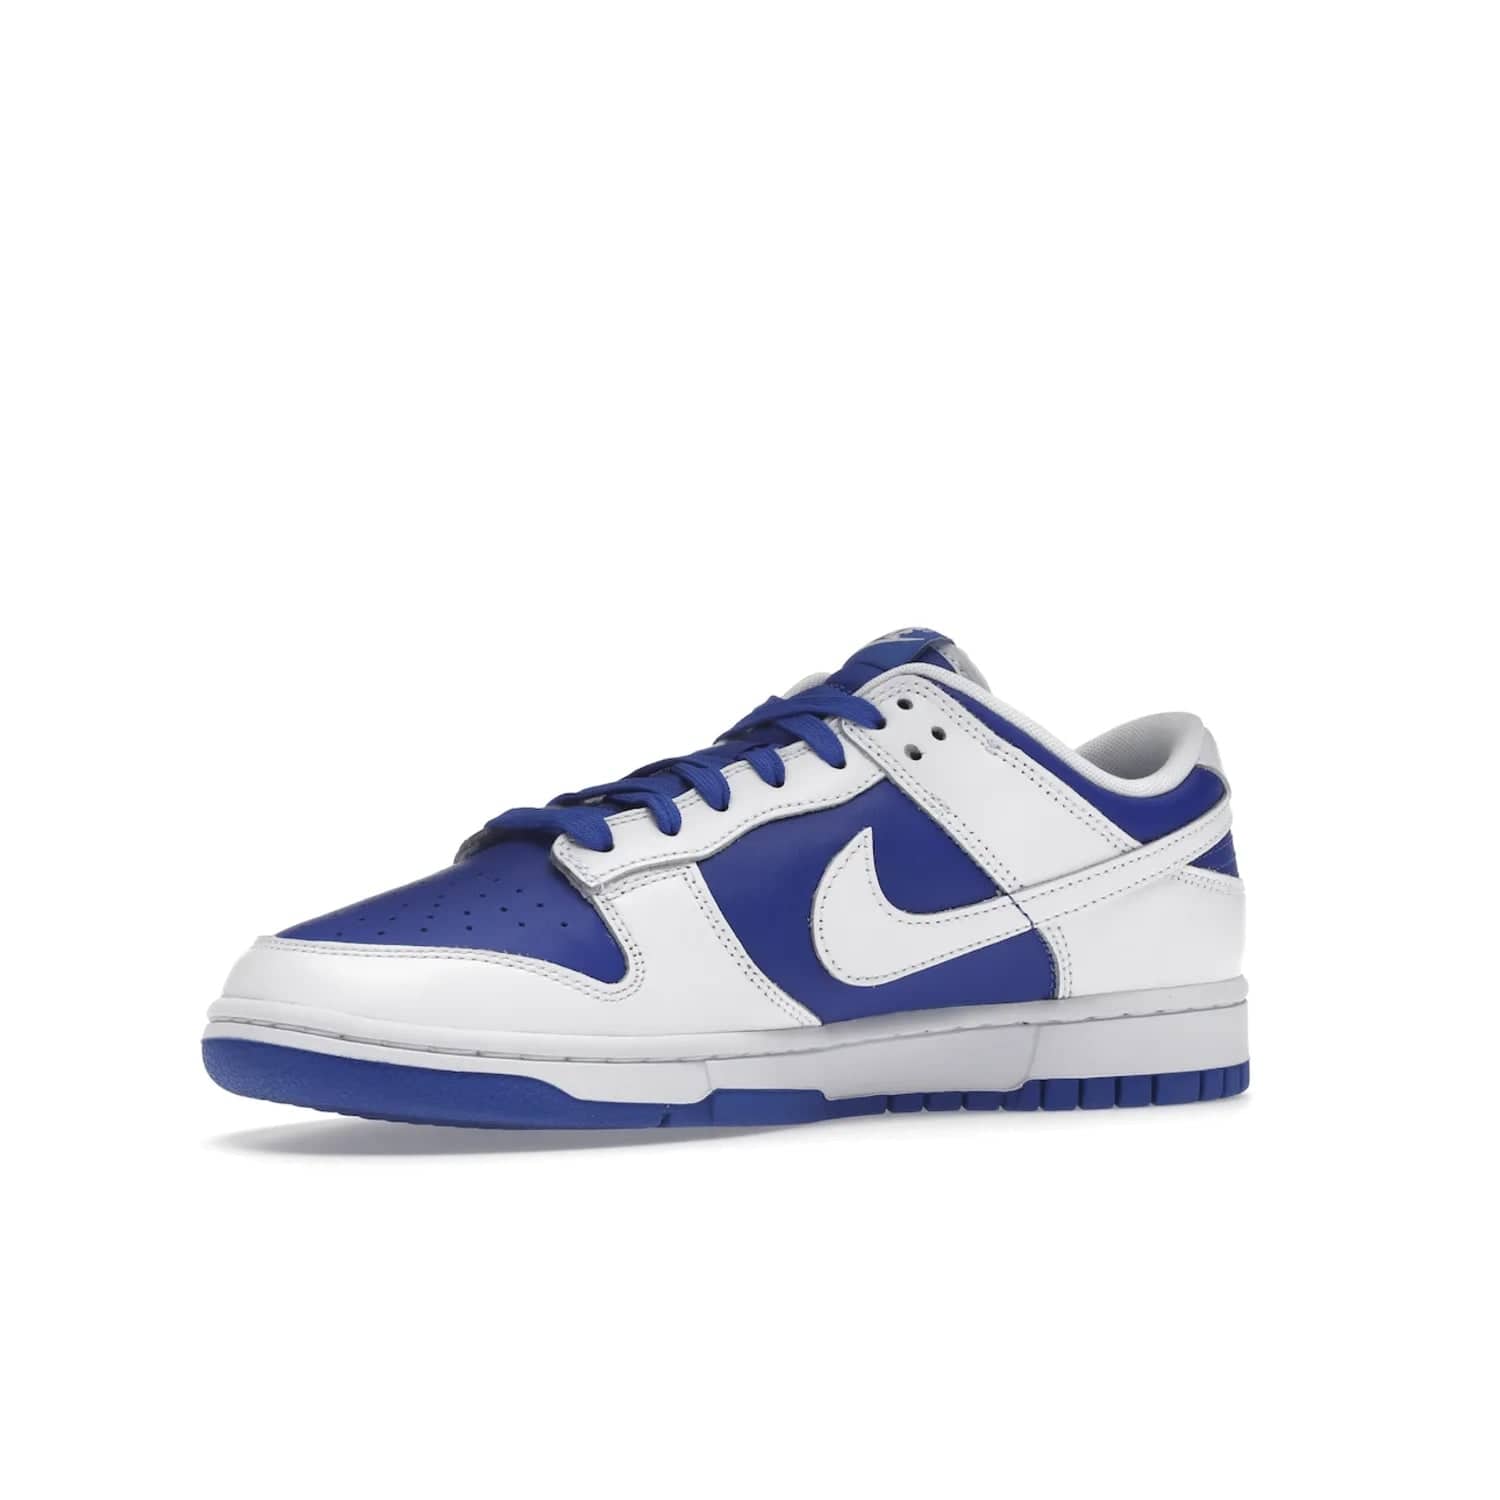 Nike Dunk Low Racer Blue White - Image 16 - Only at www.BallersClubKickz.com - Sleek Racer Blue leather upper and white leather overlays make up the Nike Dunk Low Racer Blue White. Woven tag and heel embroidery for a 1985 Dunk look with a matching EVA foam sole completes the classic colorway.